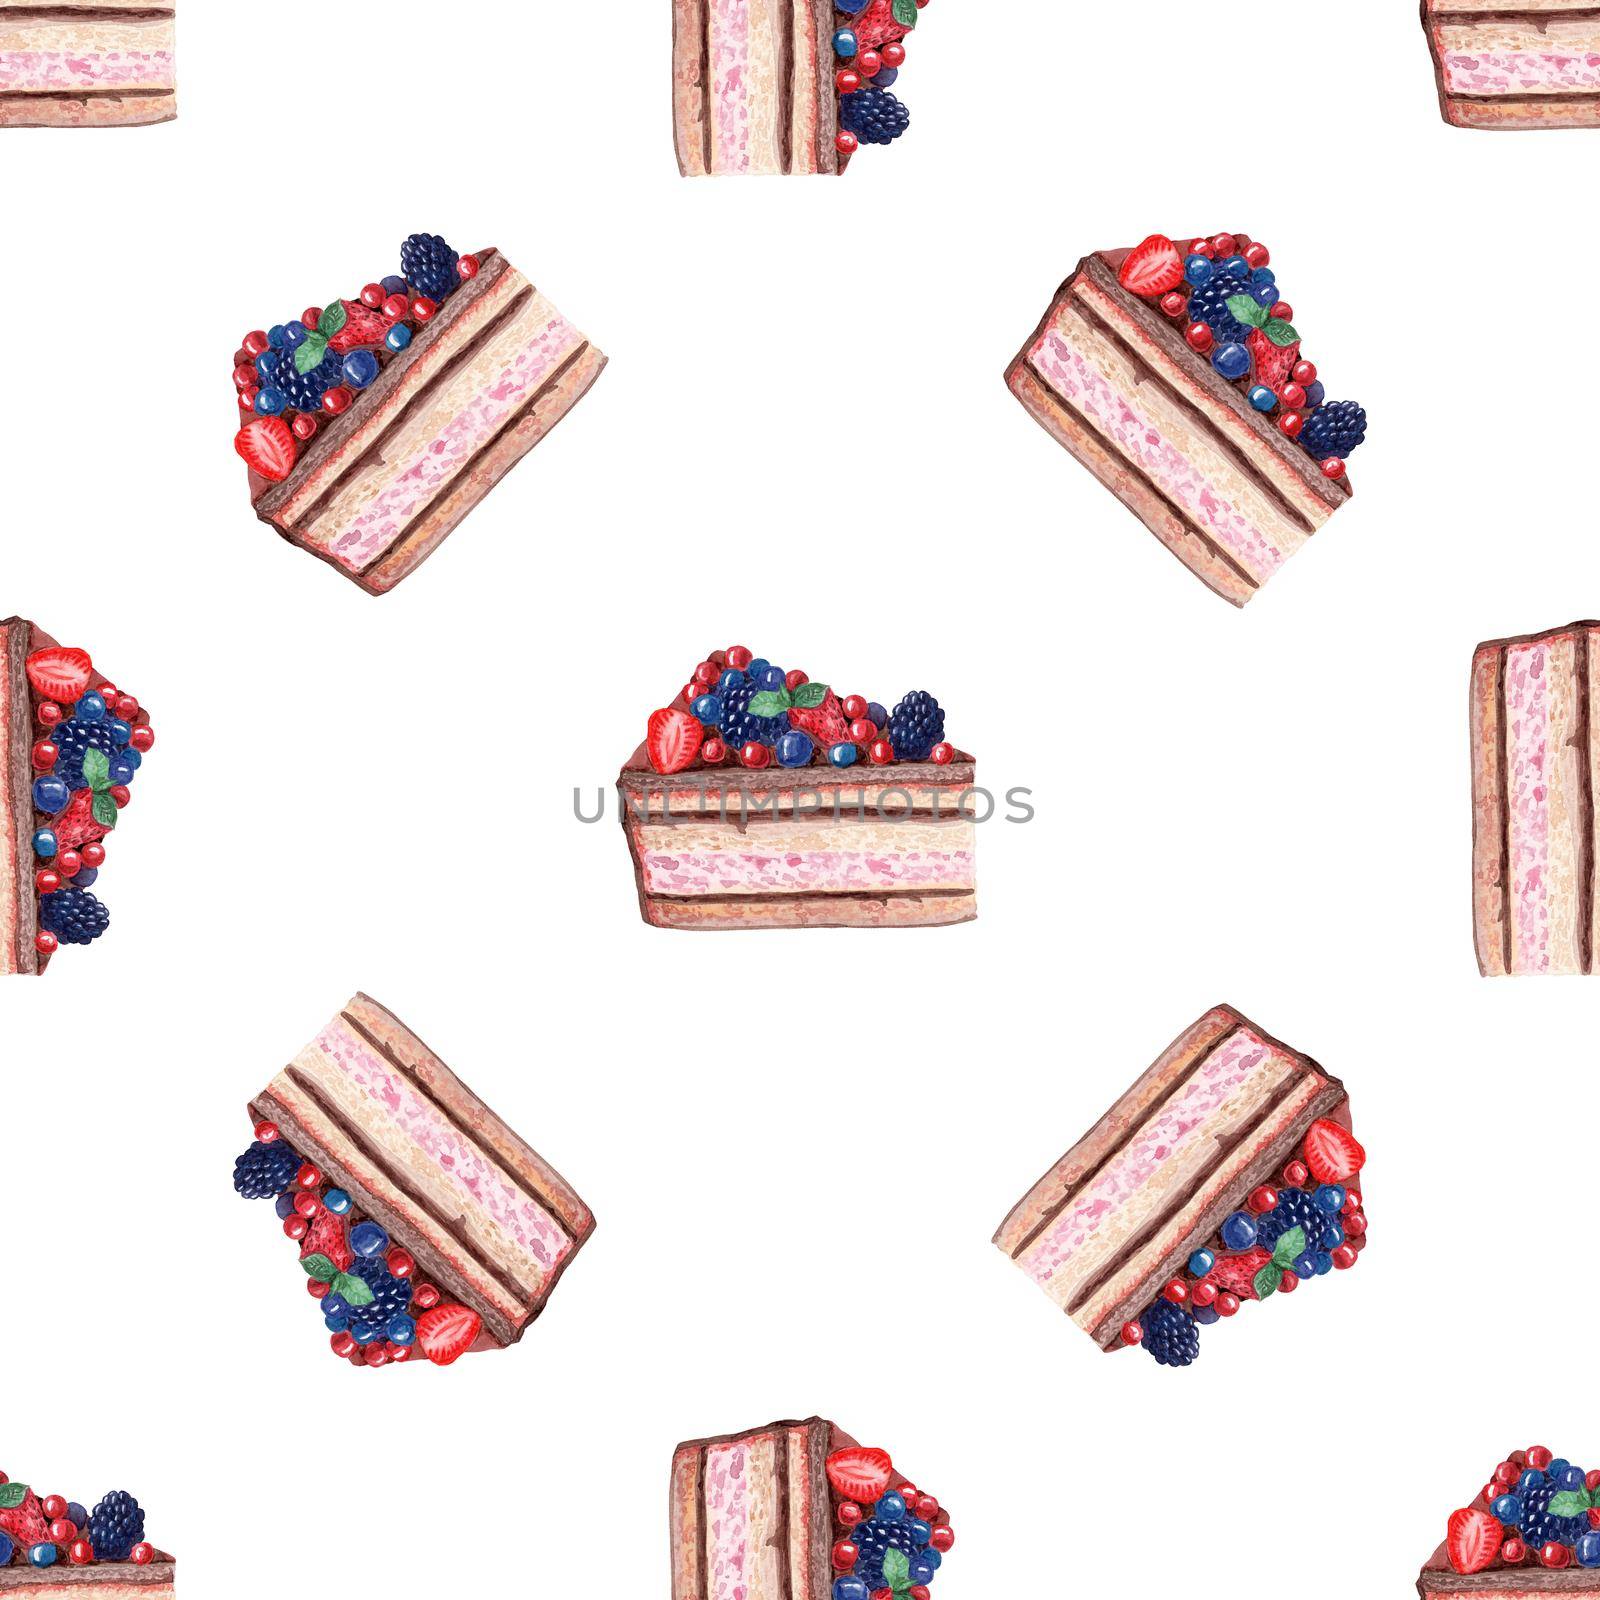 watercolor cake seamless pattern on white background. Dessert print for wallpapers, wrapping, fabric, scrapbooking paper